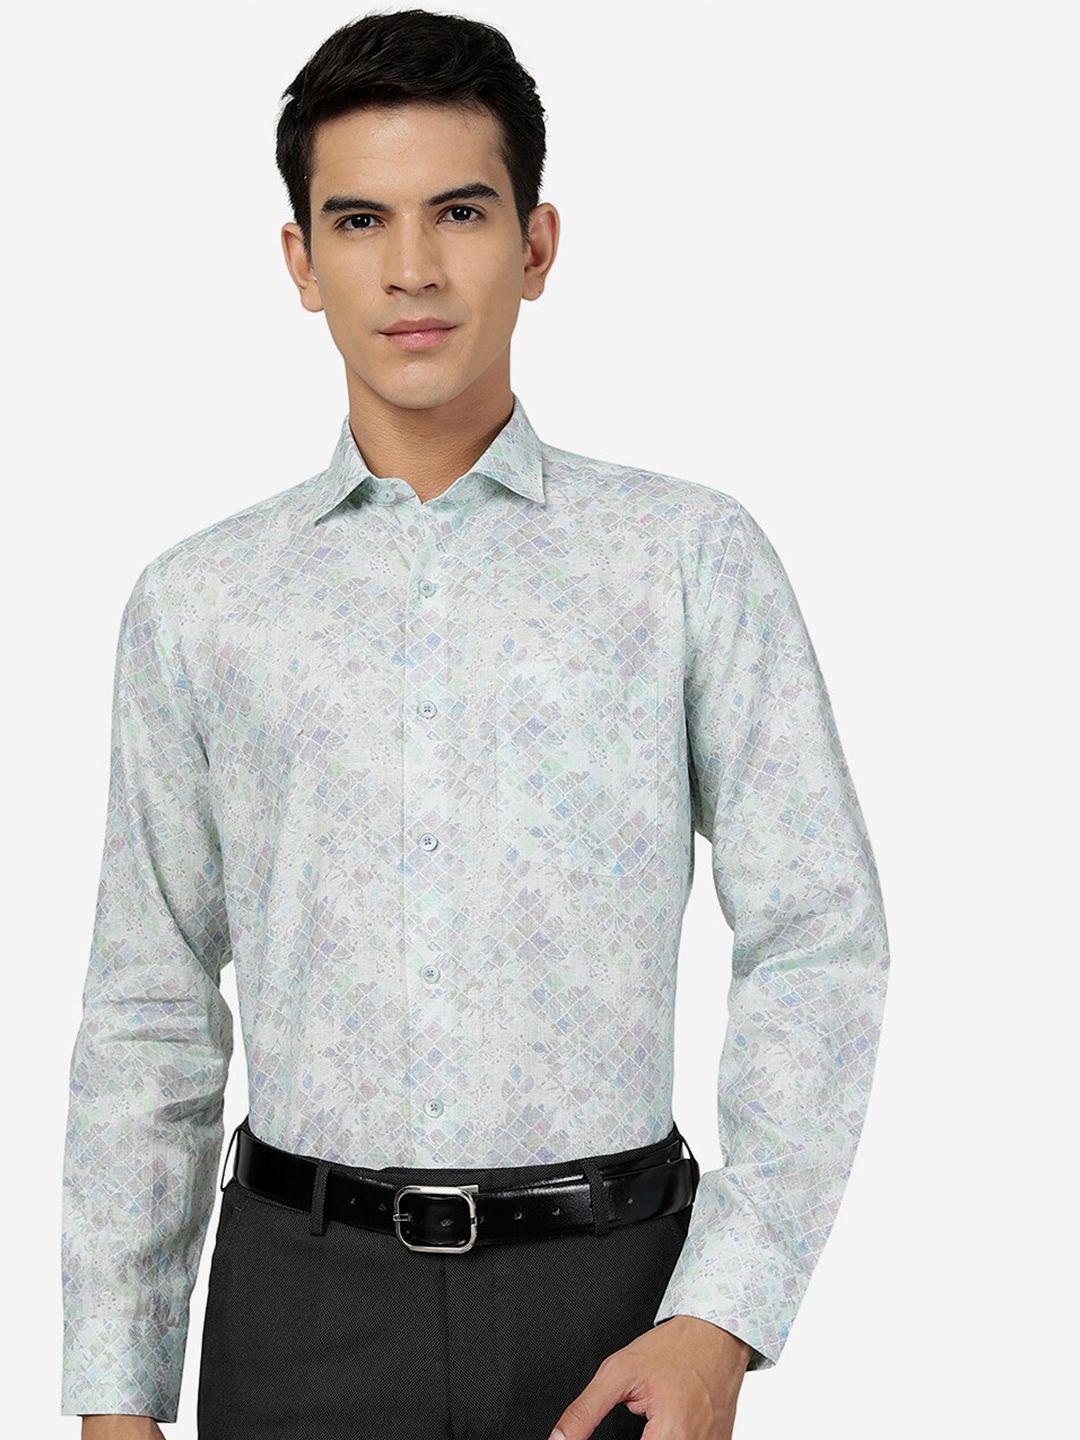 jade blue abstract printed pure linen pure cotton formal shirt